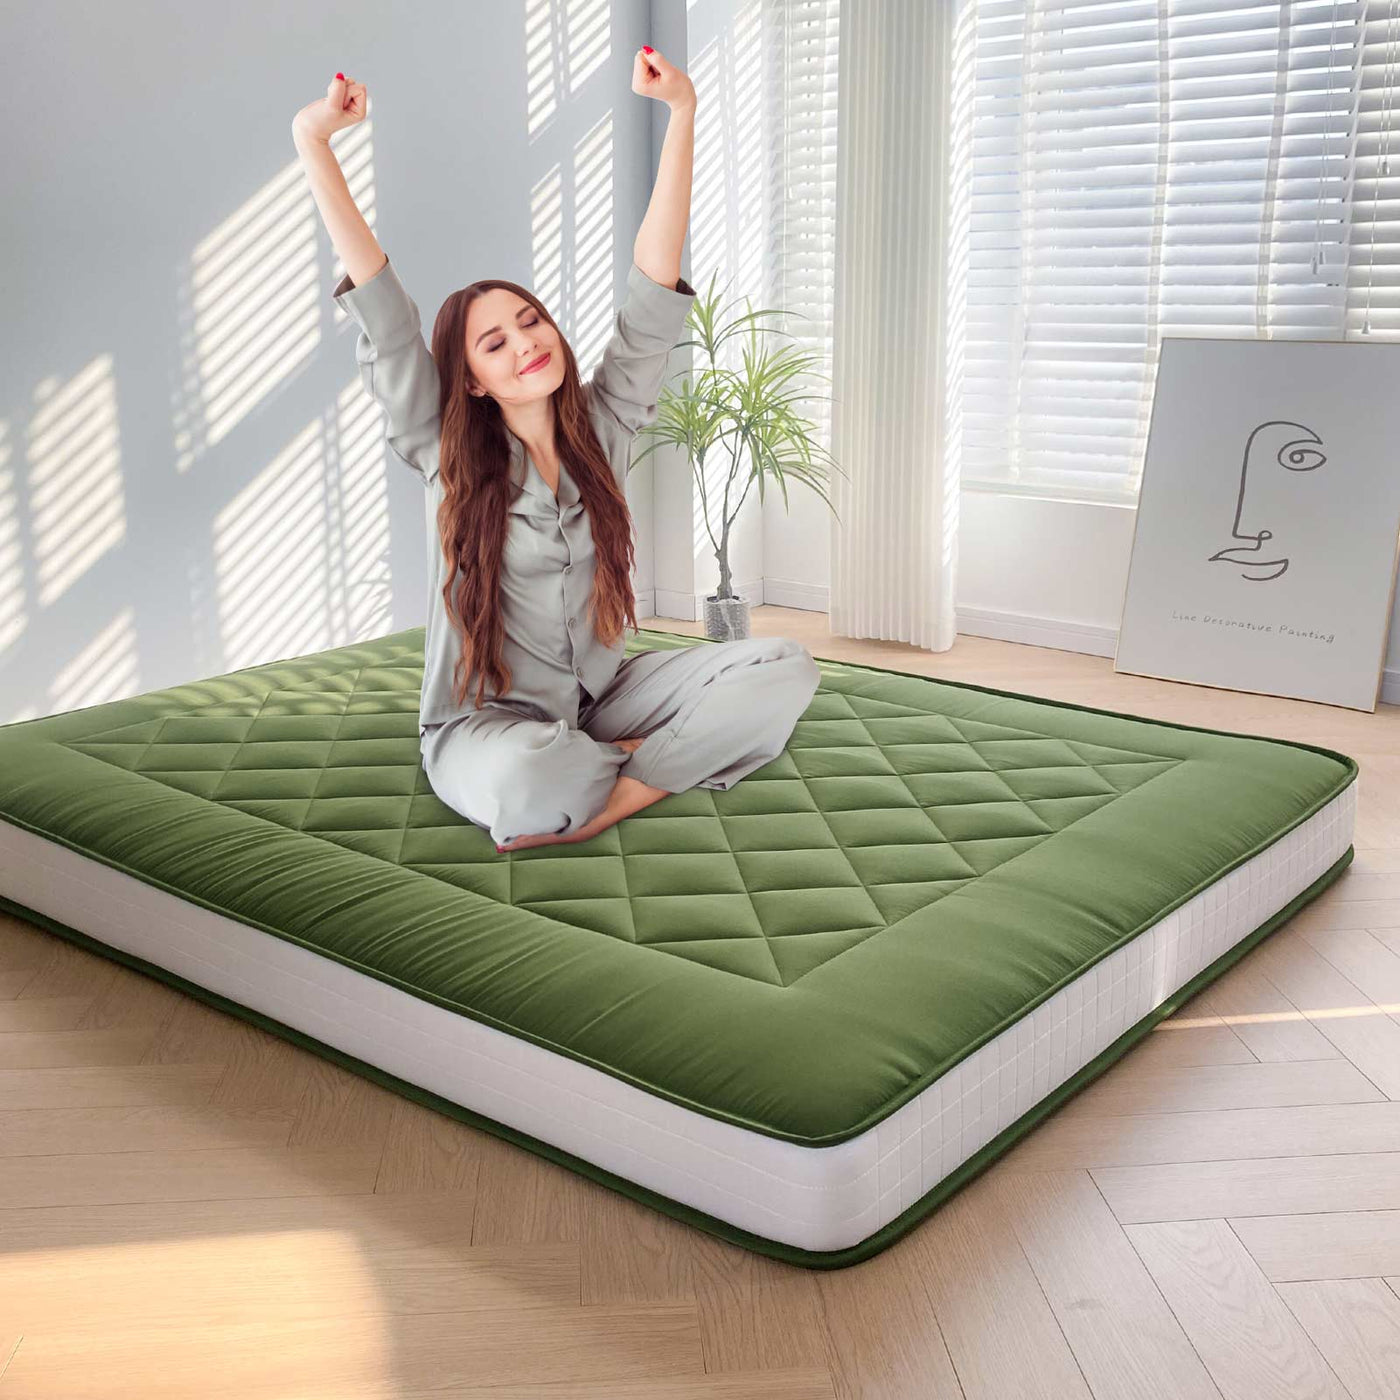 MAXYOYO 6" Extra Thick Japanese Futon Mattress, Stylish Diamond Quilting Floor Bed For Bedroom, Green